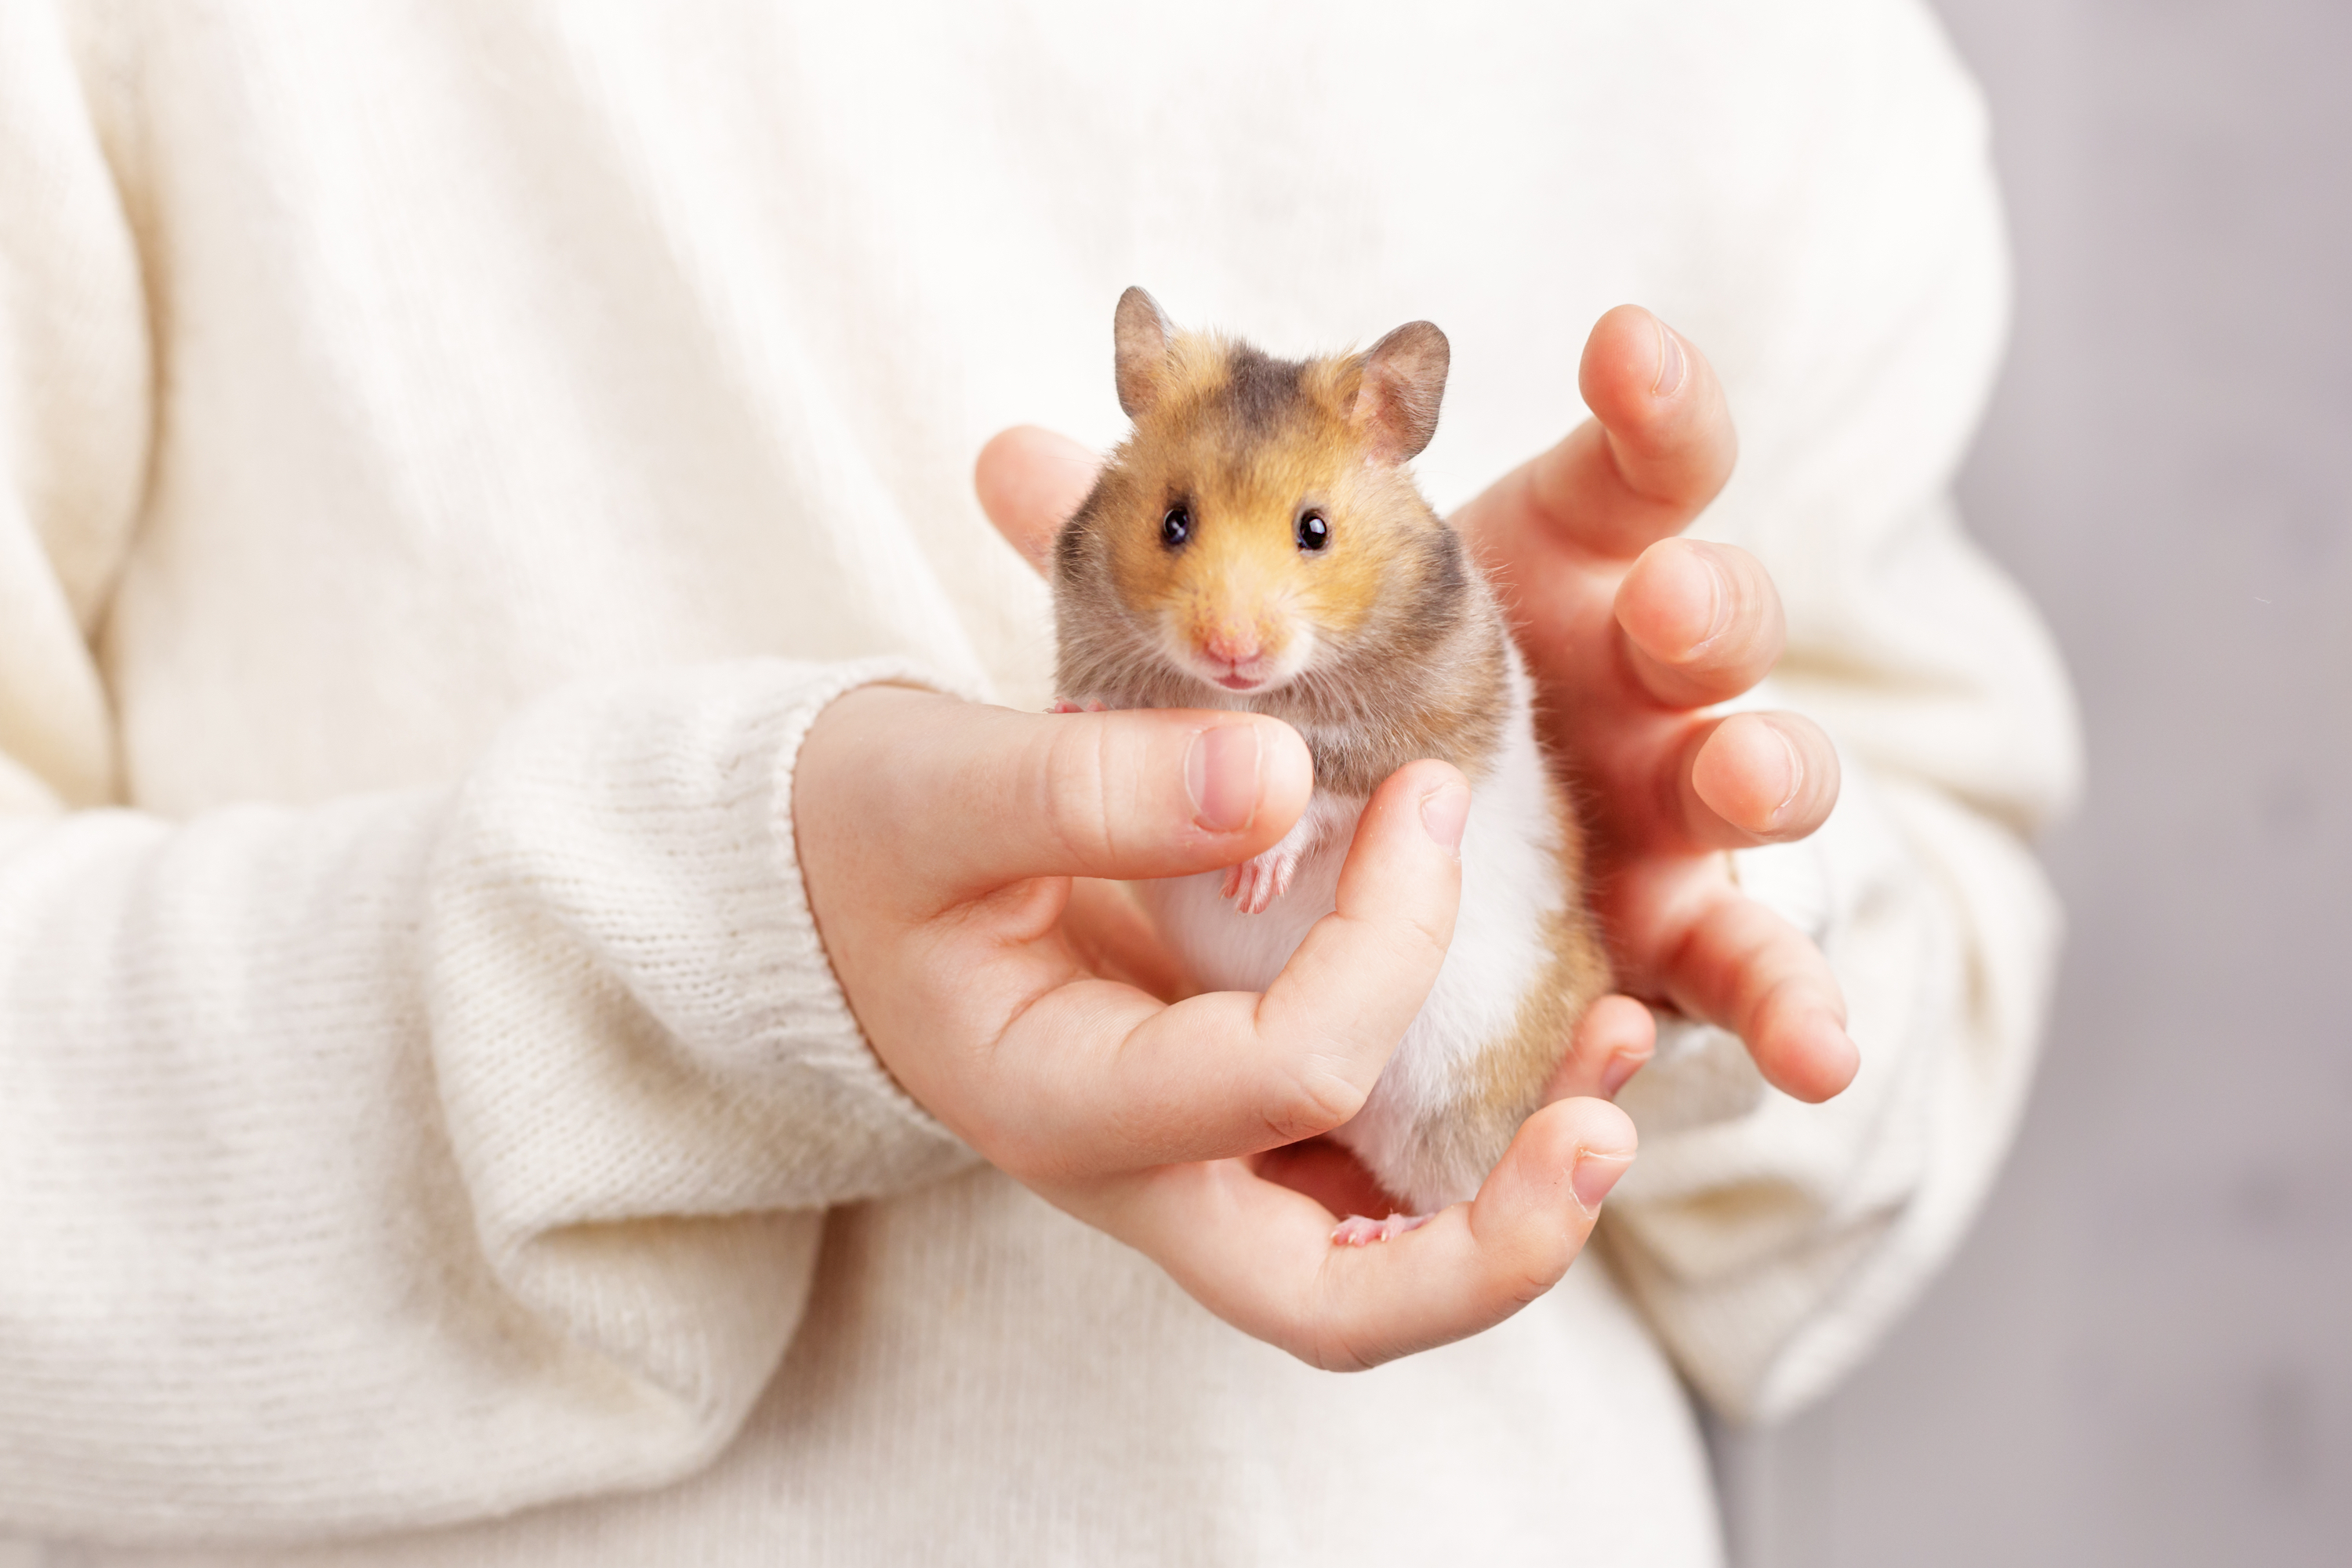 Owner holds her hamster in her hands